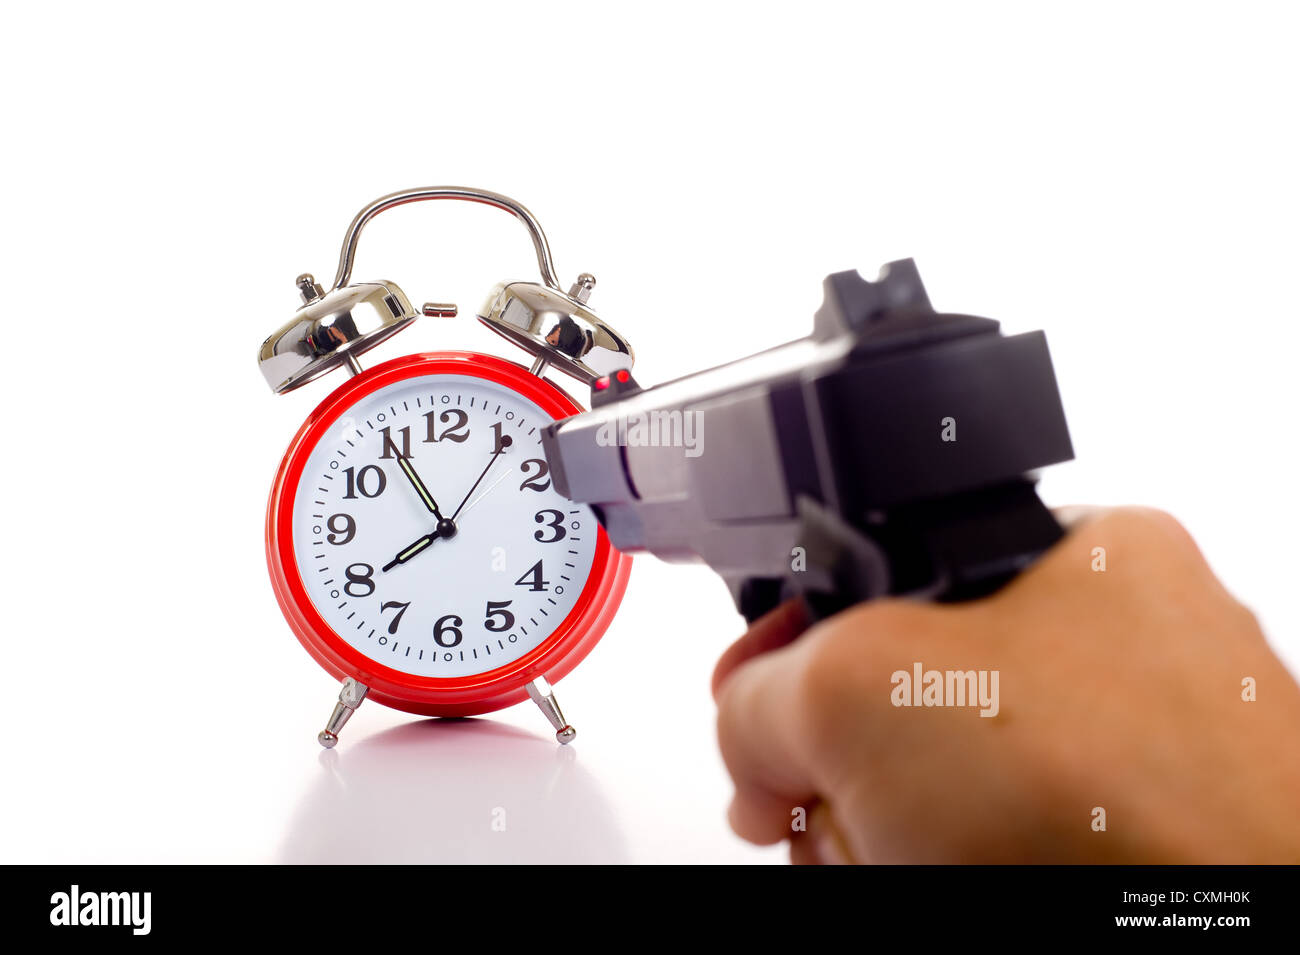 A hand holding a gun aimed at a red vintage alarm clock Stock Photo - Alamy